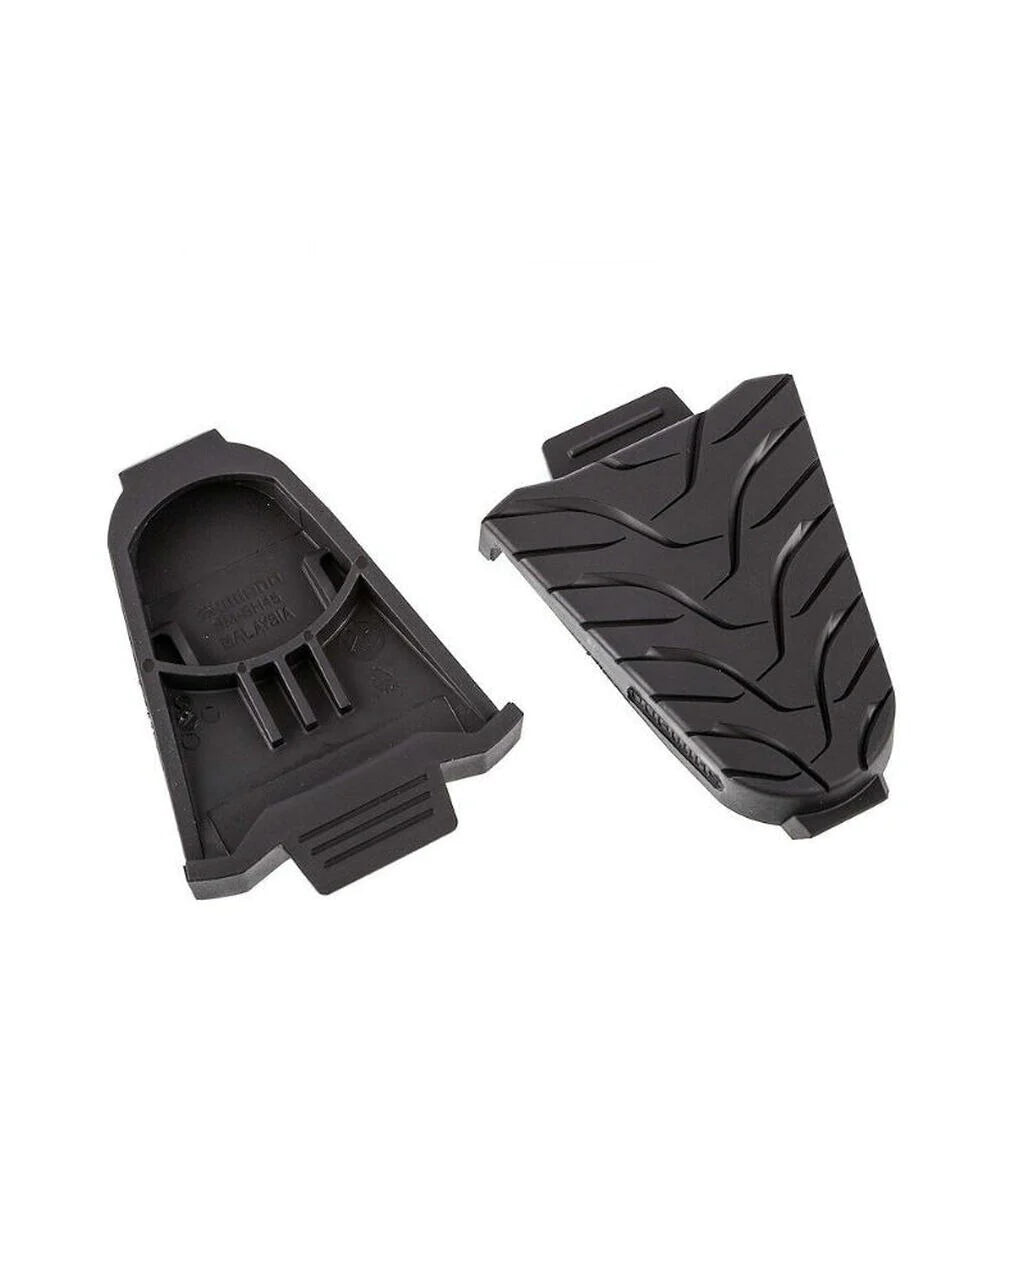 SHIMANO CLEAT RUBBER COVER SPD SL ESMSH 45